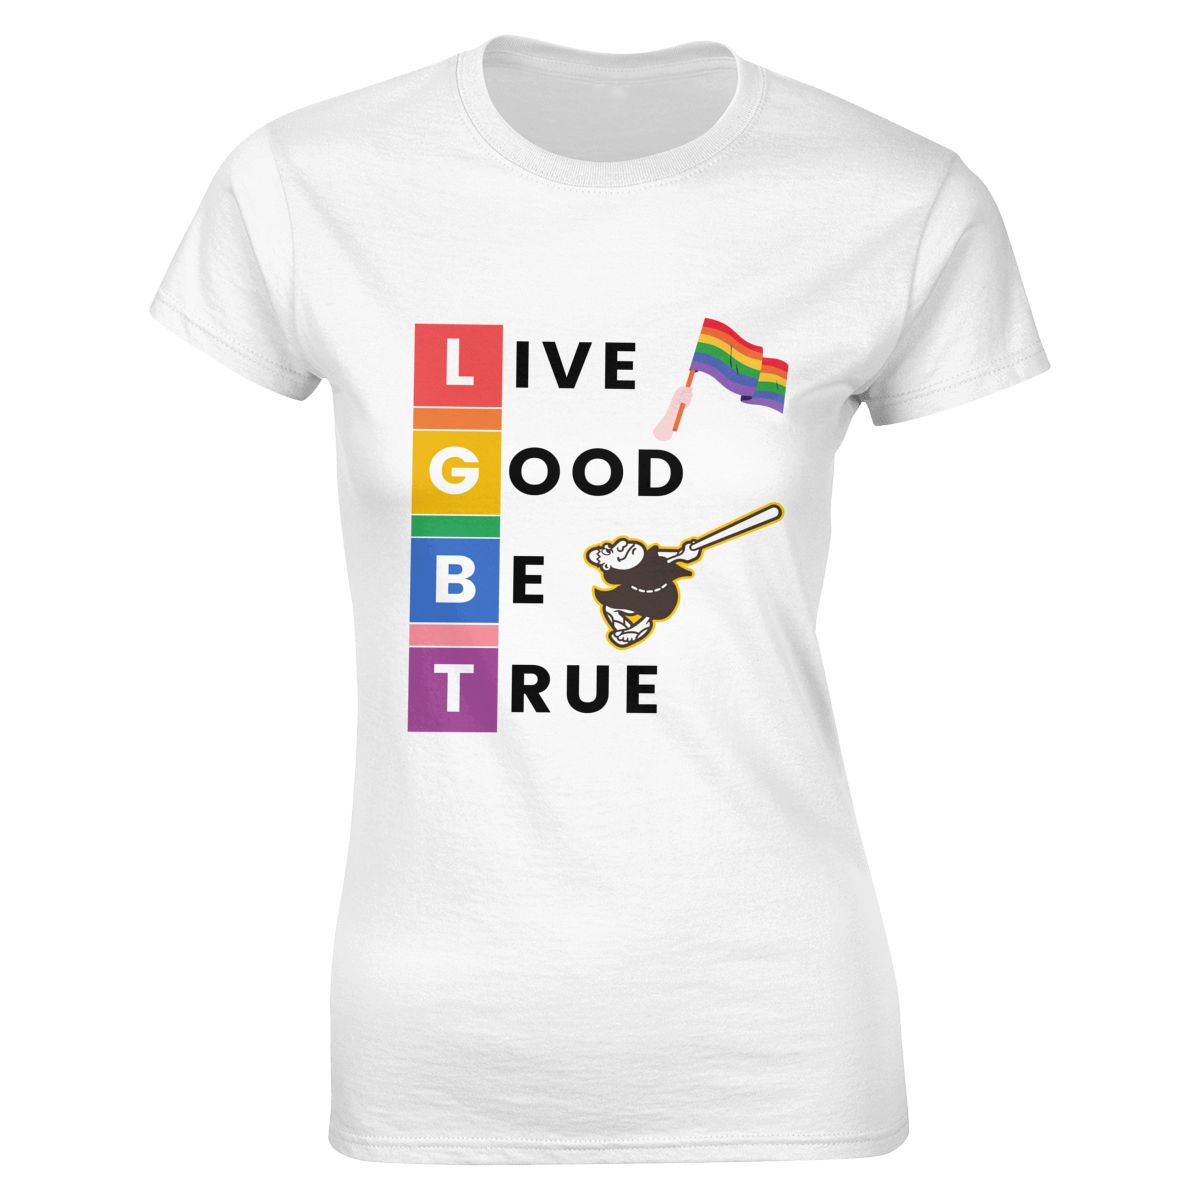 San Diego Padres LGBT Pride Women's Classic-Fit T-Shirt